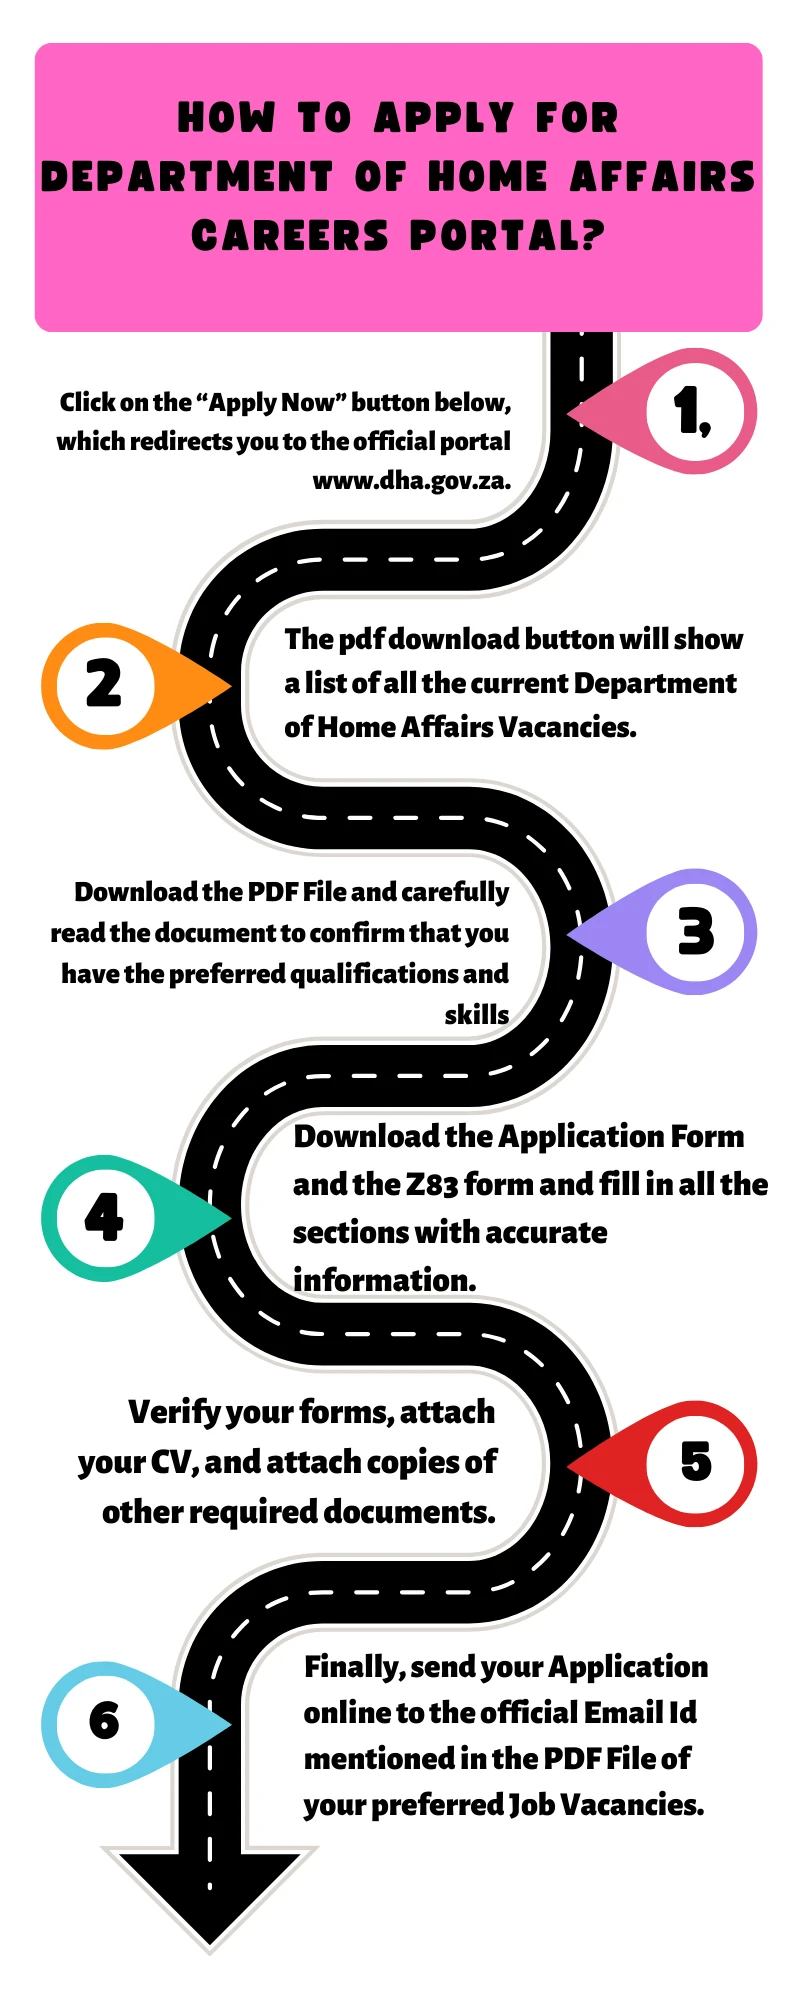 How To Apply For Department of Home Affairs Careers Portal?